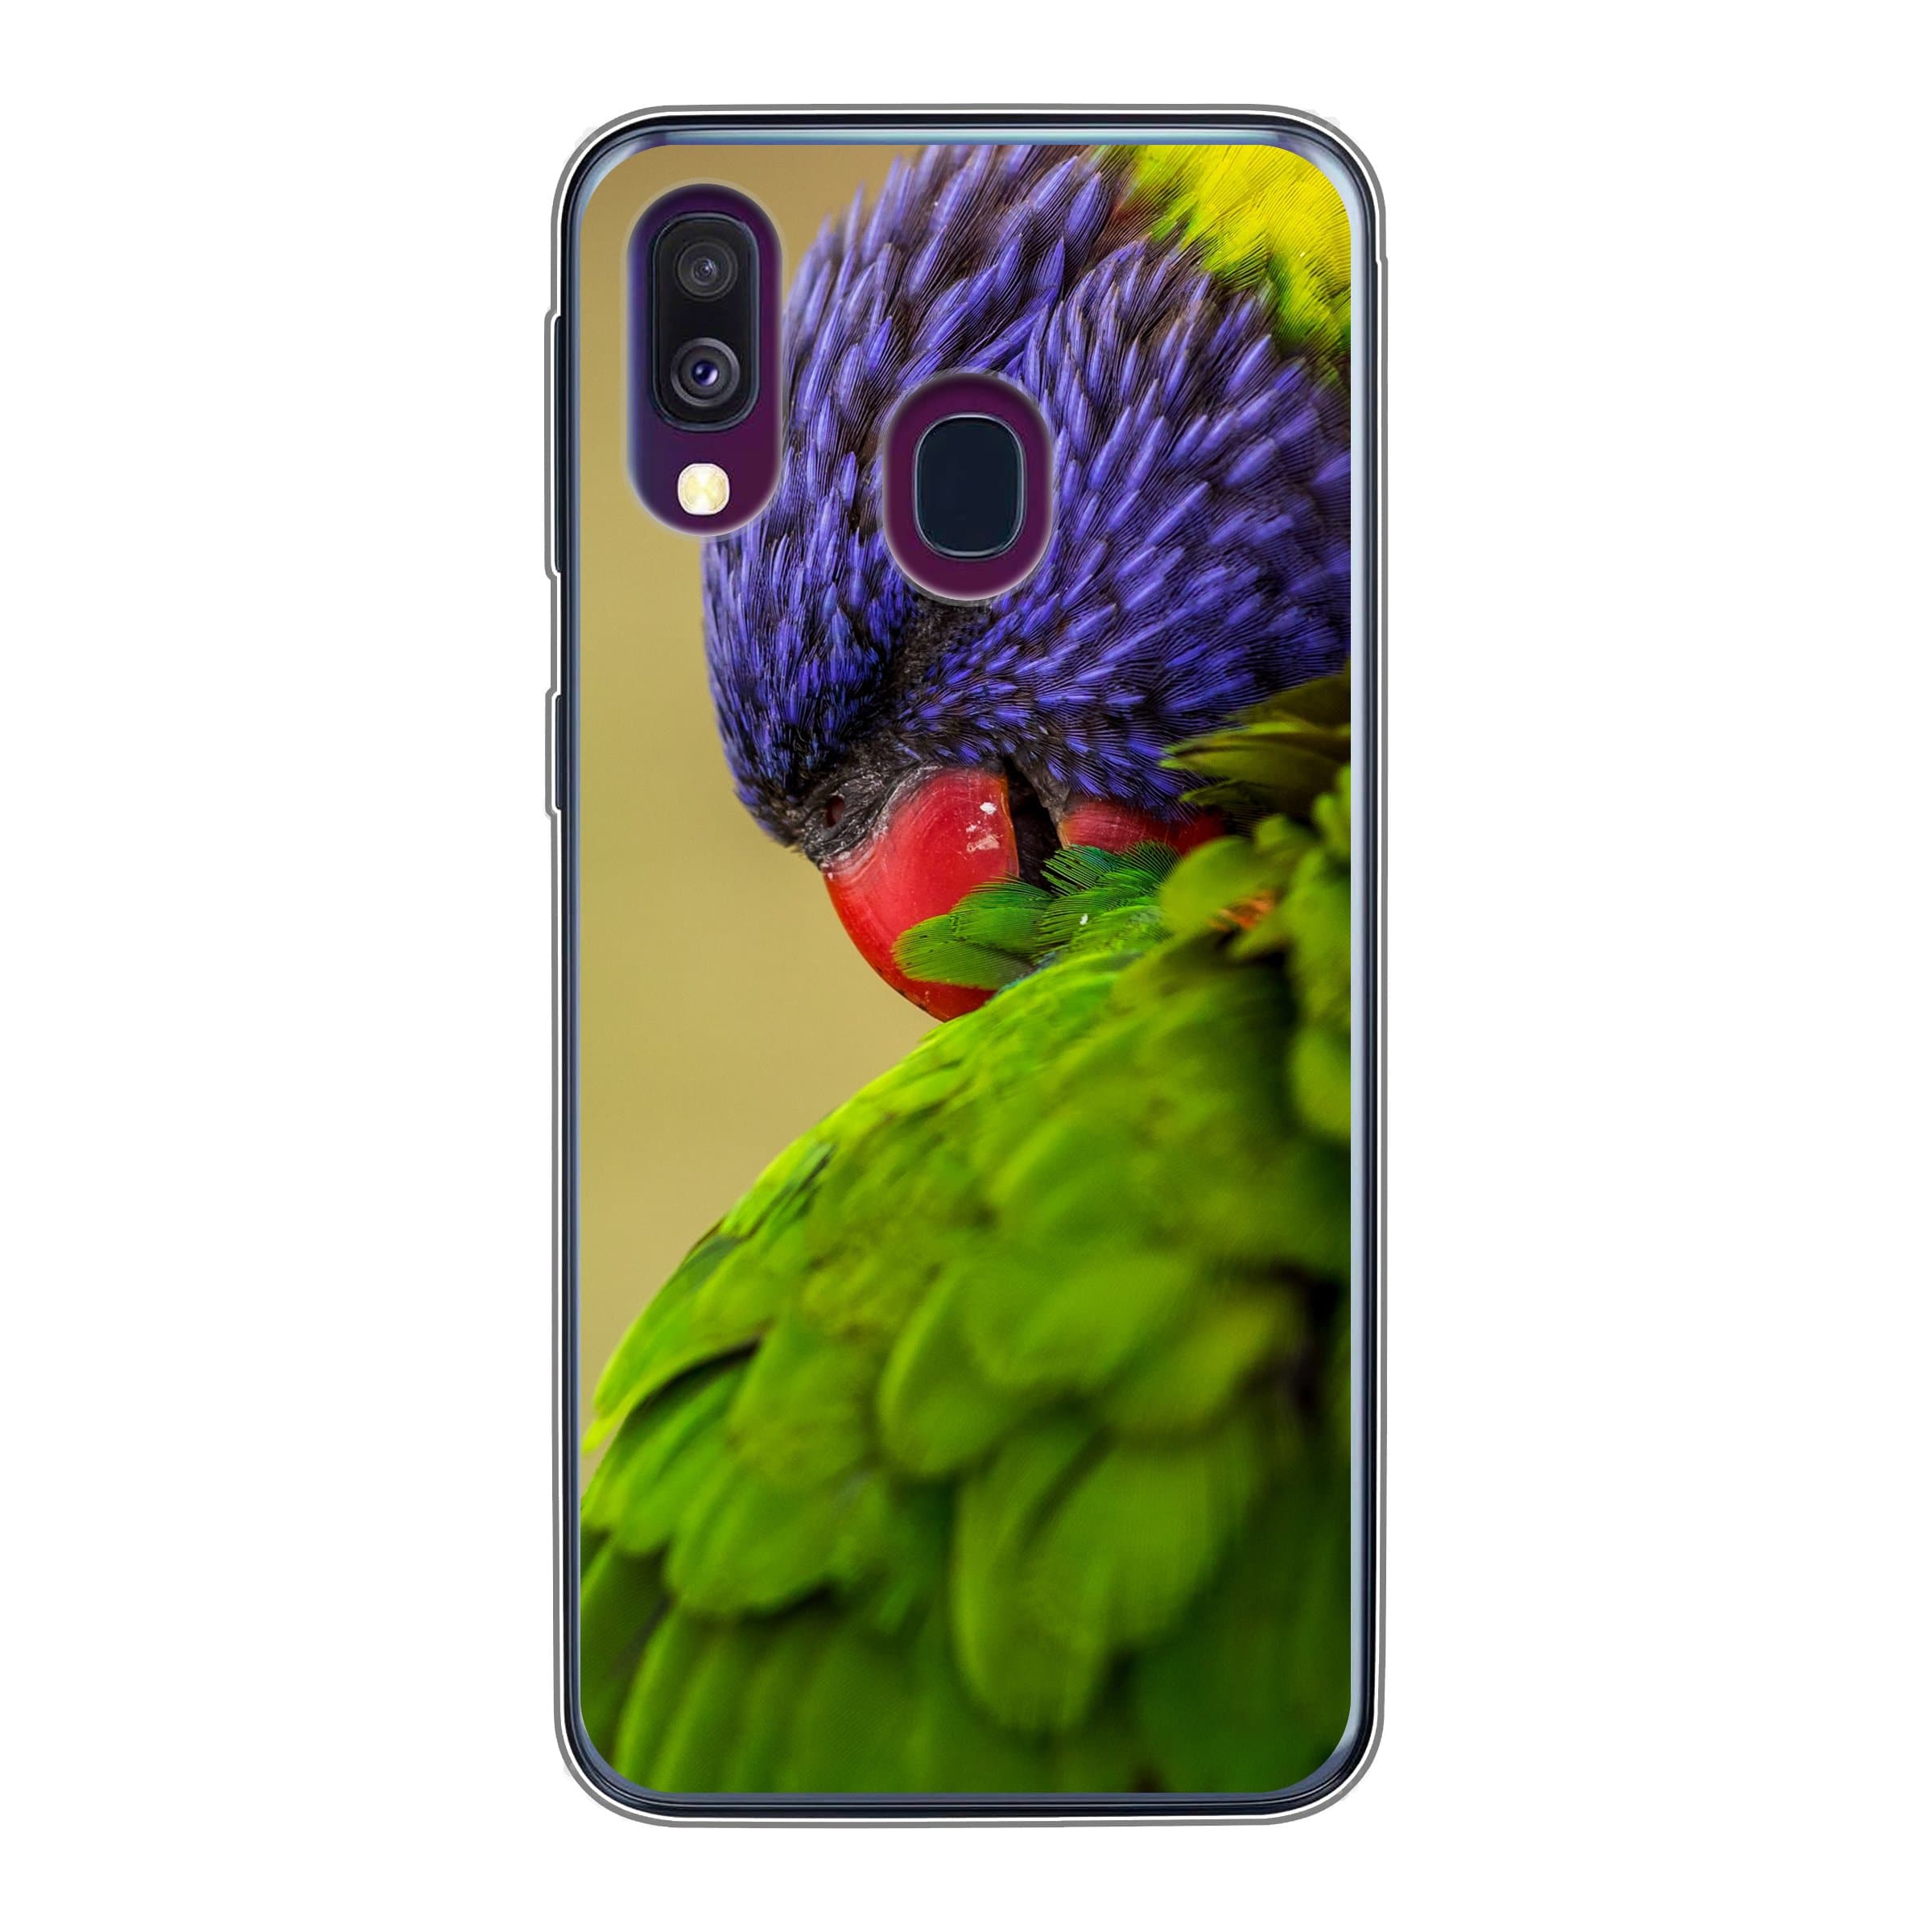 Personalised Samsung Galaxy A40 Soft Phone Case